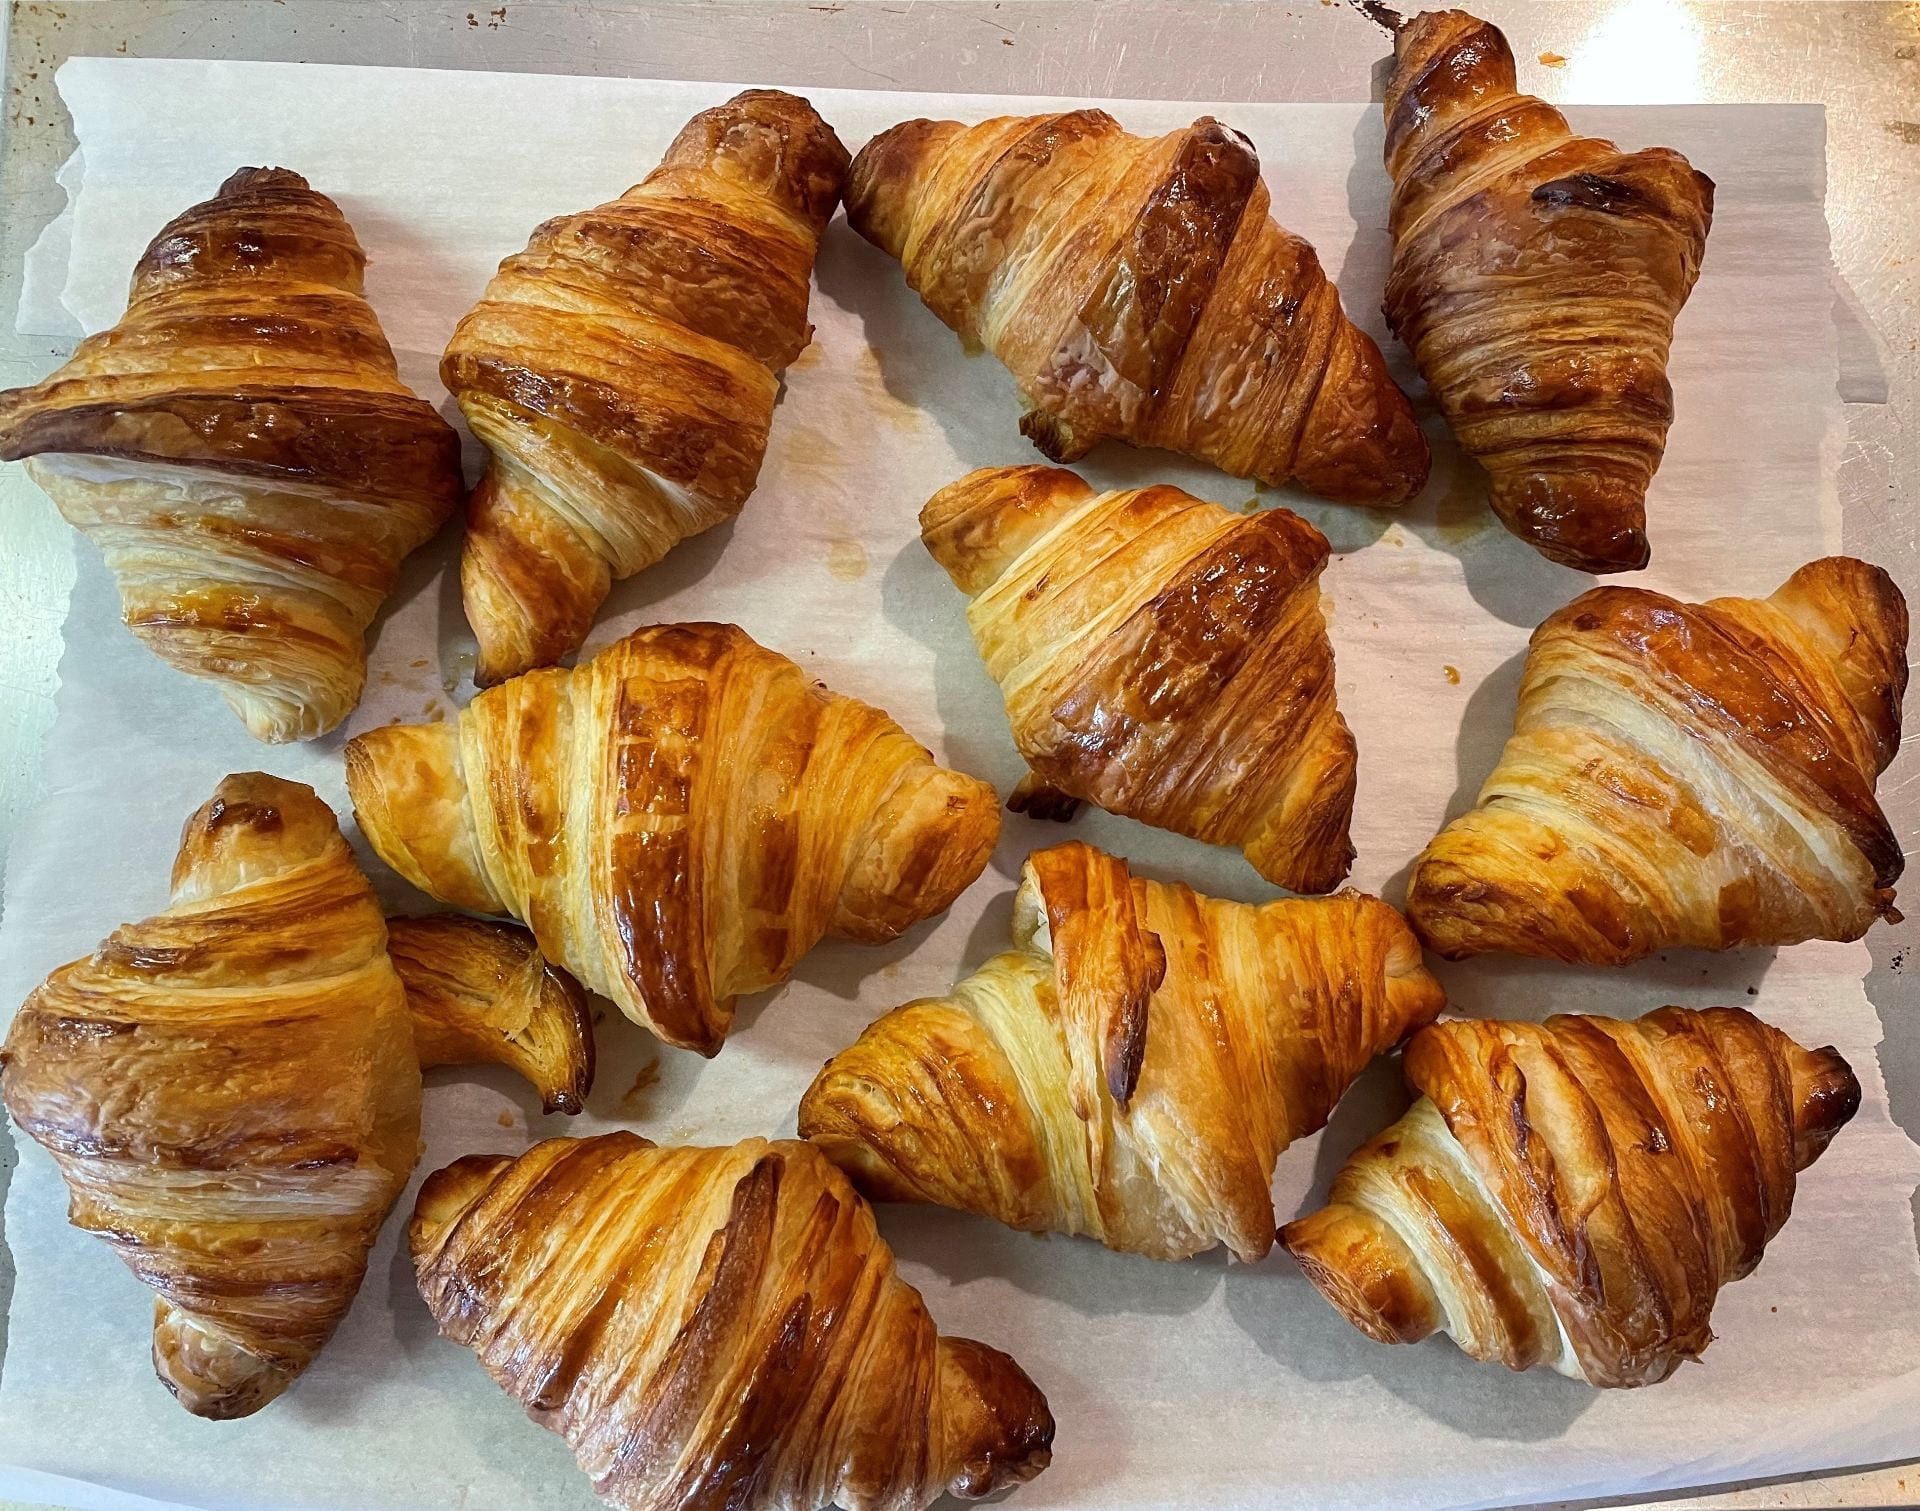 11 golden-brown freshly-baked croissants on parchment paper